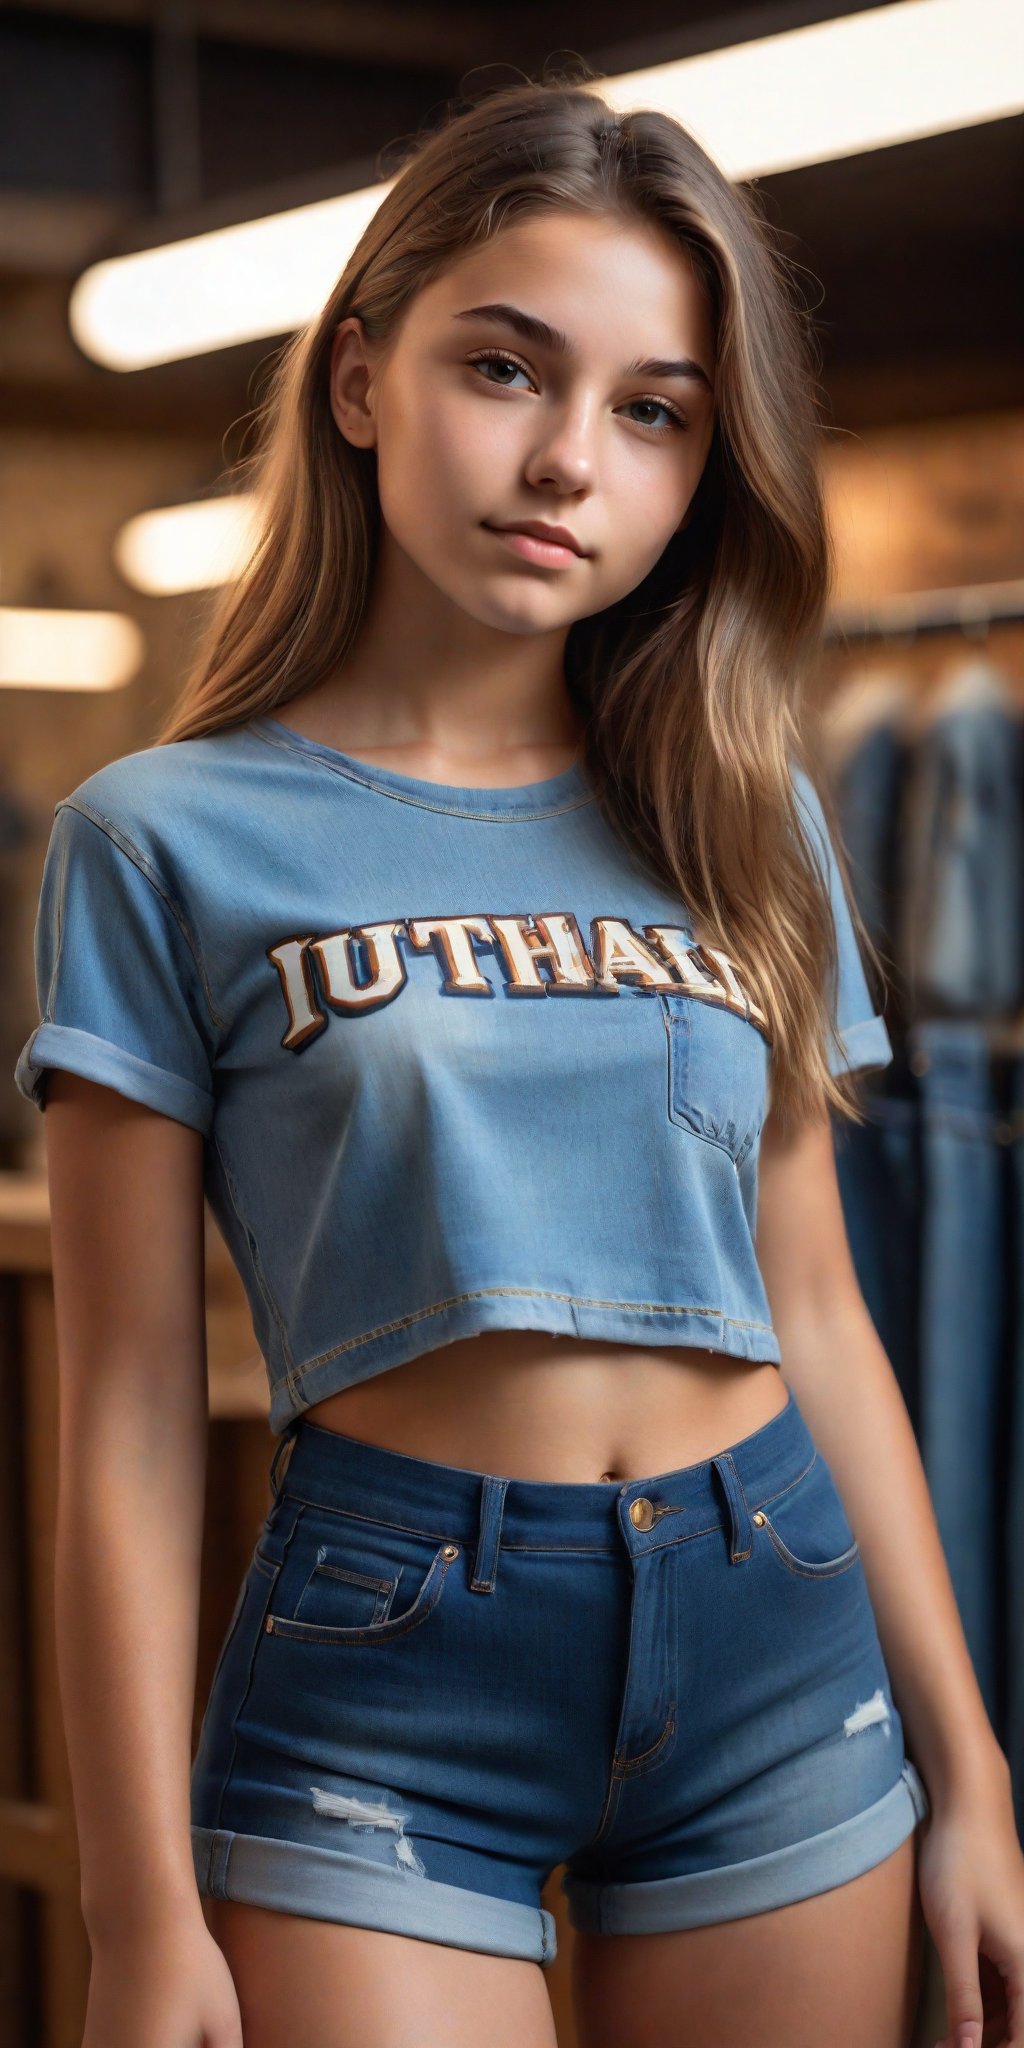 Ultra-detailed portrait of a stunning 19-year-old girl with long hair, posing confidently in an Instagram-inspired pose. Standing tall, she gazes directly into the lens with perfect lighting casting a warm glow on her features. Her denim relaxed shorts are mid-wash blue, accentuating her toned legs and youthful charm. The overall framing is sharp and crisp, showcasing the masterpiece's high resolution and intricate details.